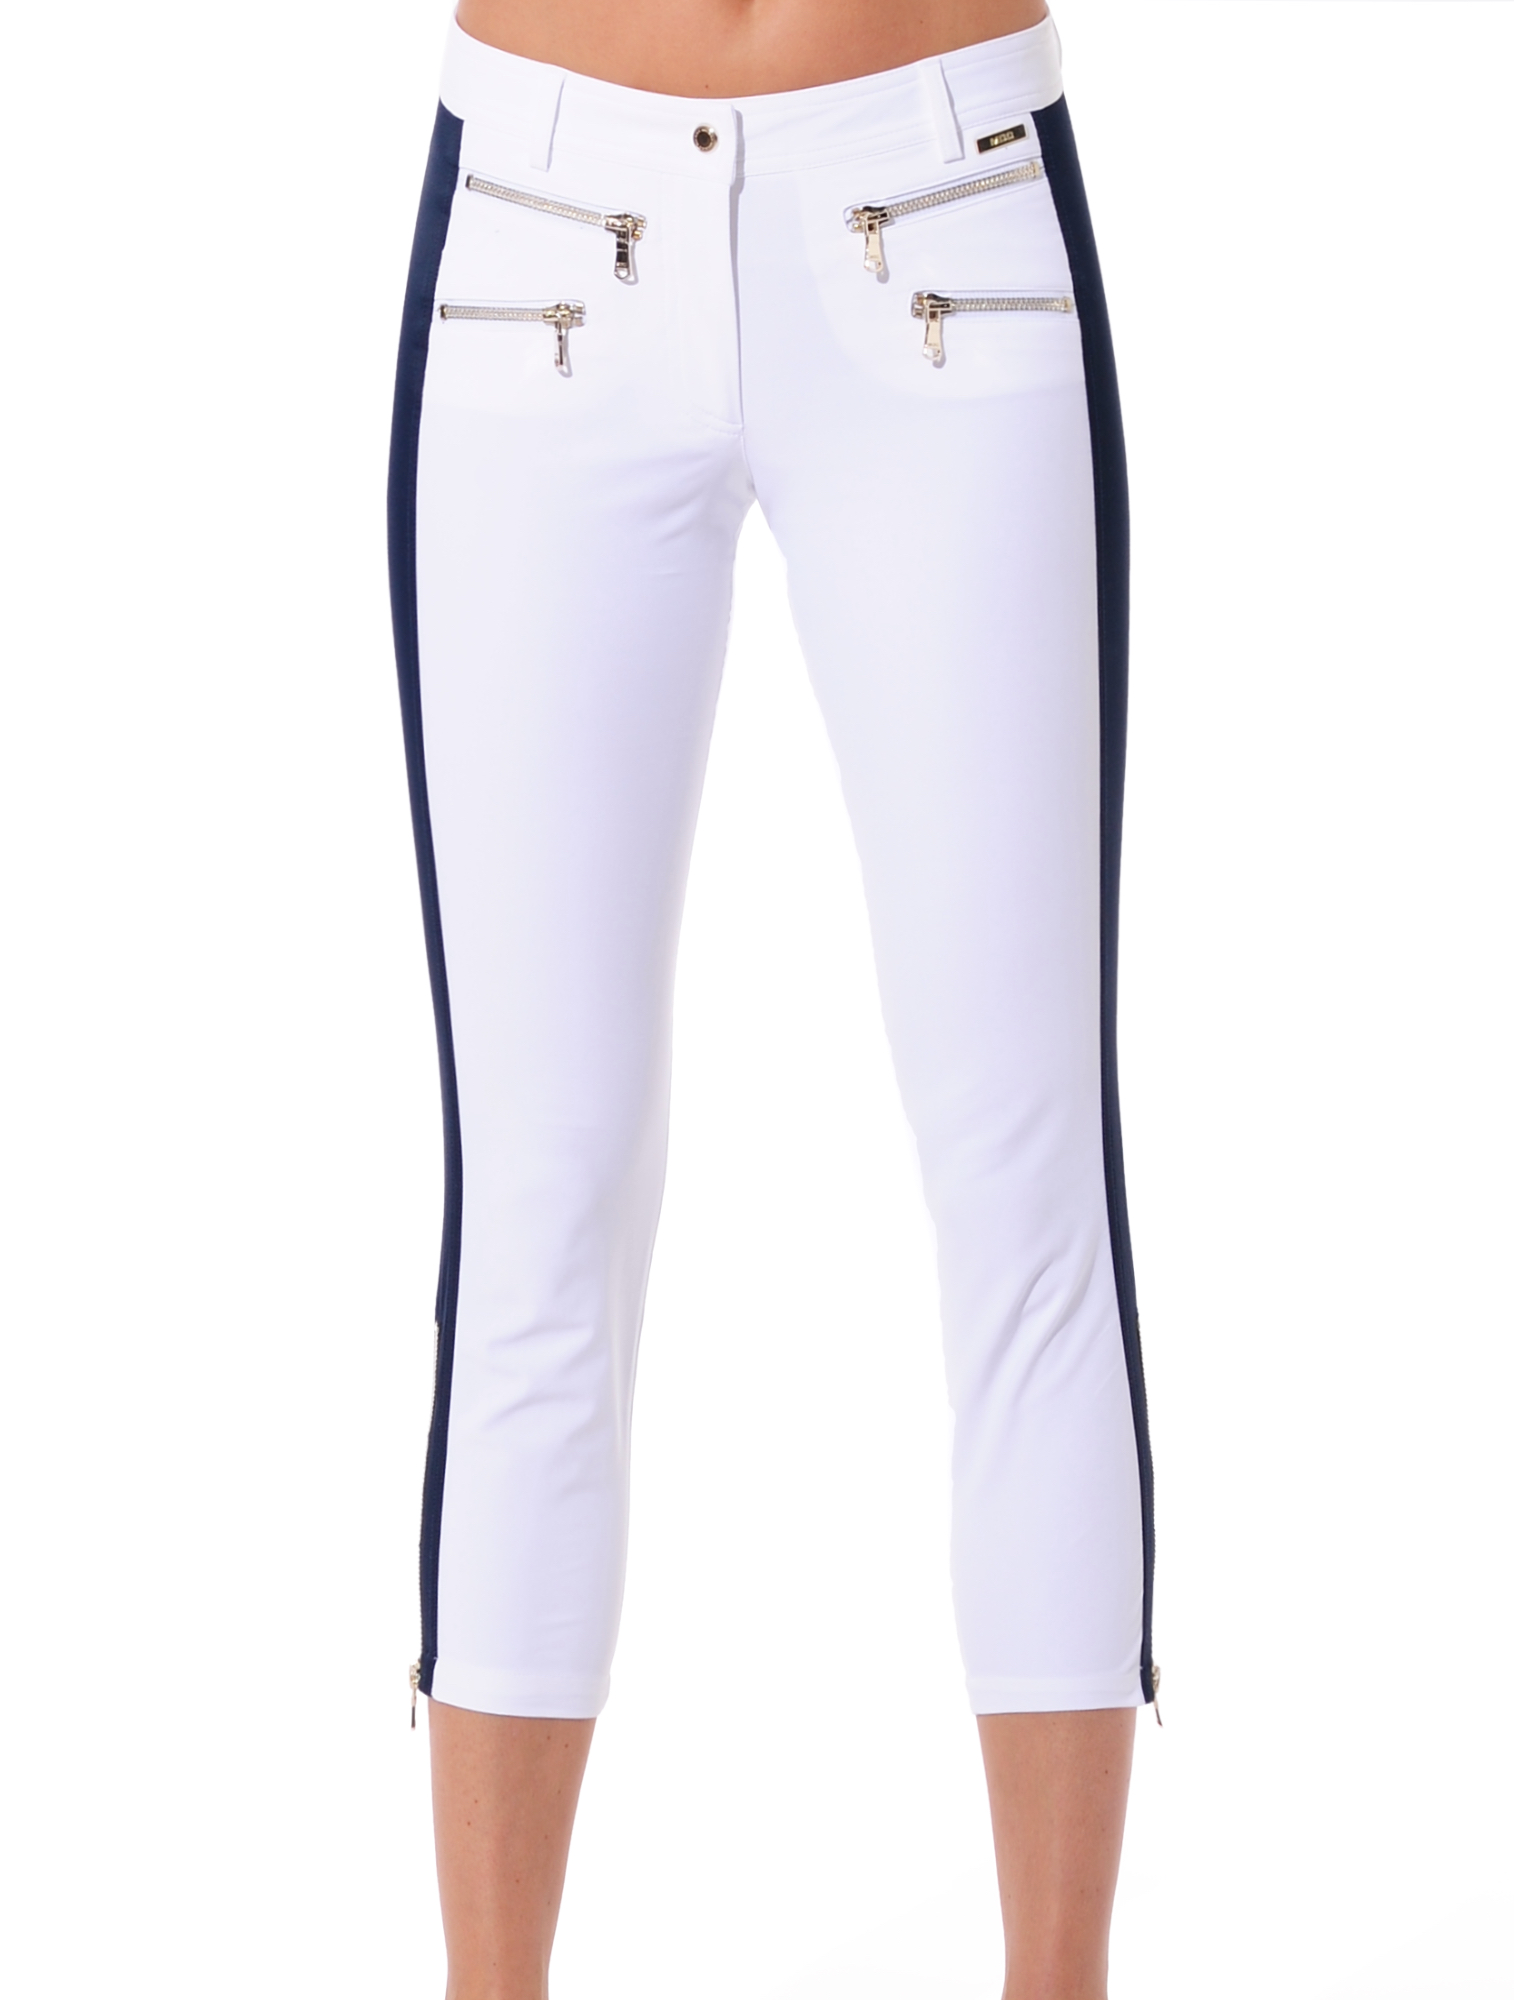 4way stretch double zip cropped pants white/navy 